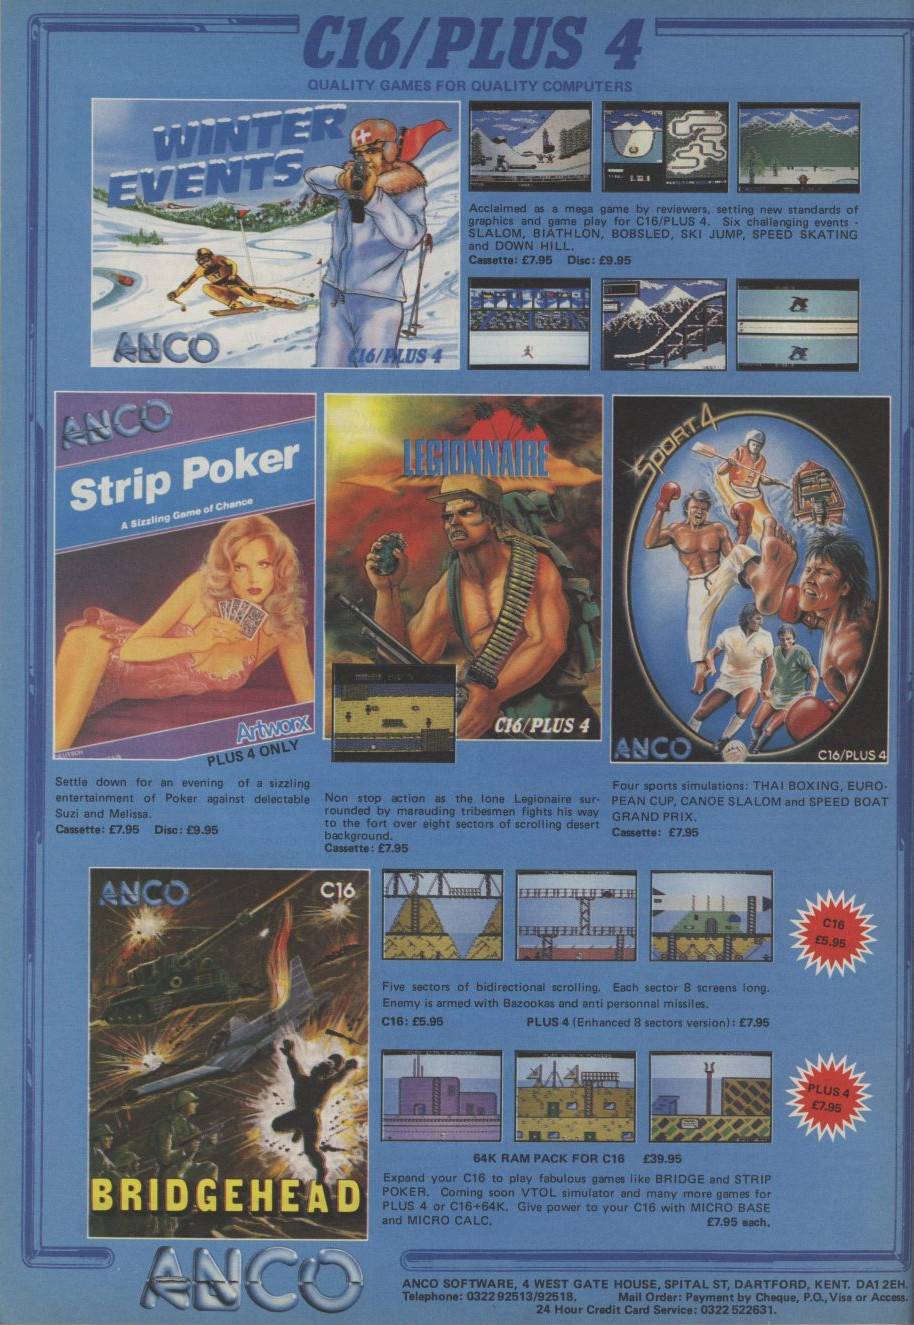 Commodore User Issue 39, Magazines from the Past Wiki